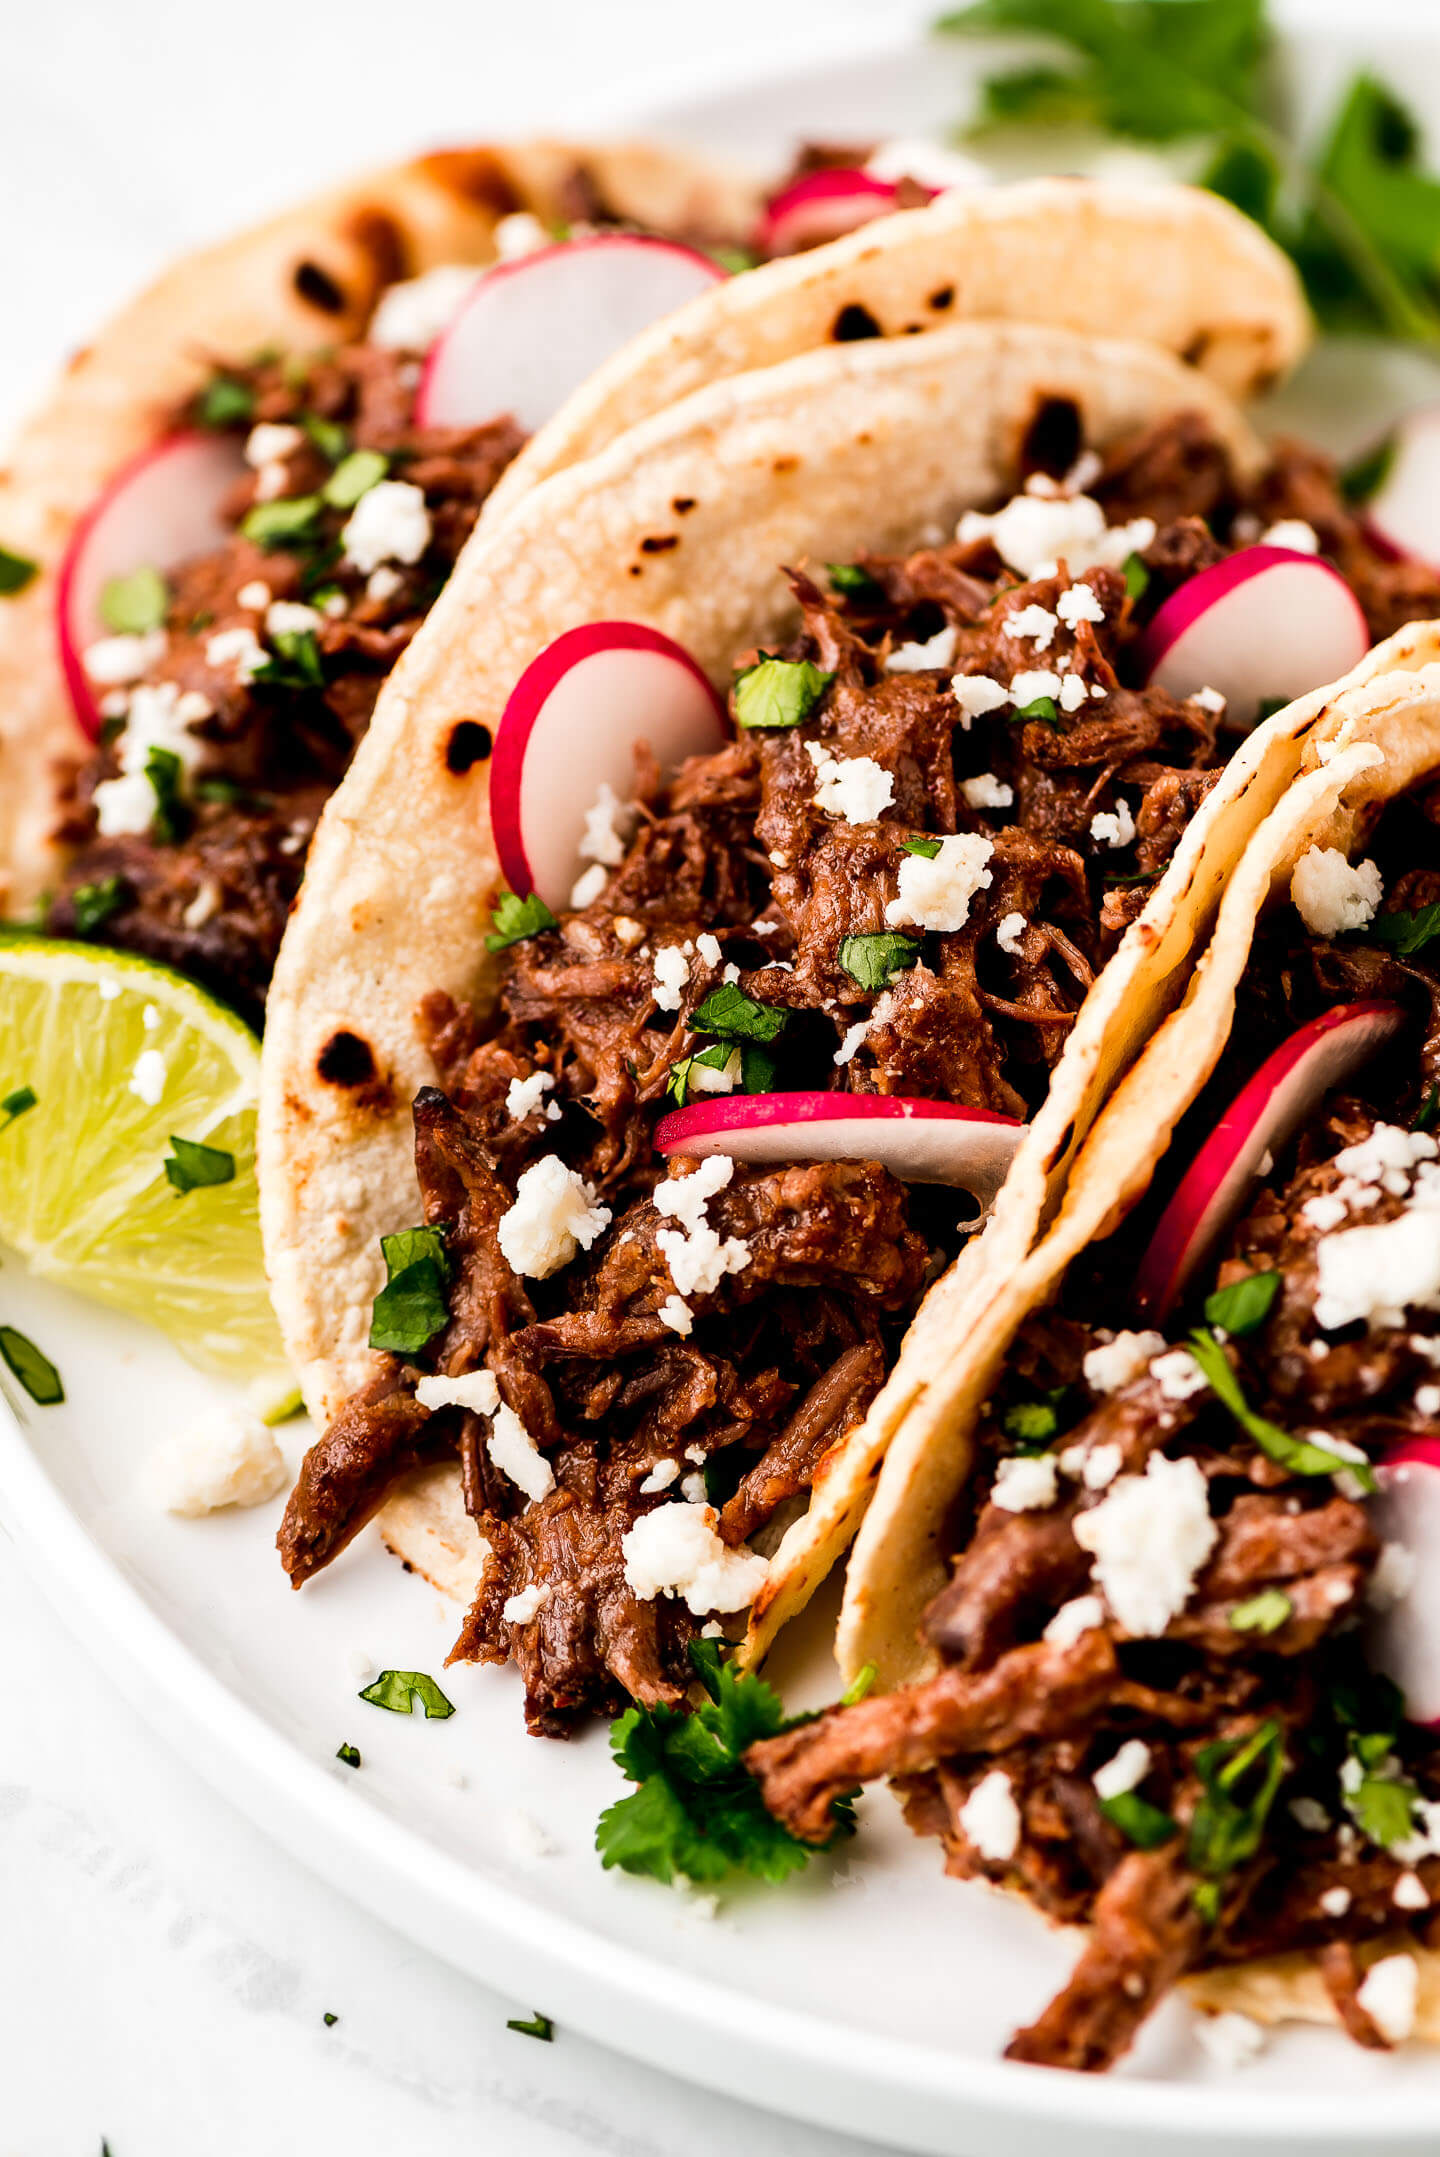 Beef Barbacoa in corn tortillas garnished with cilantro, sliced radishes, and queso fresco.